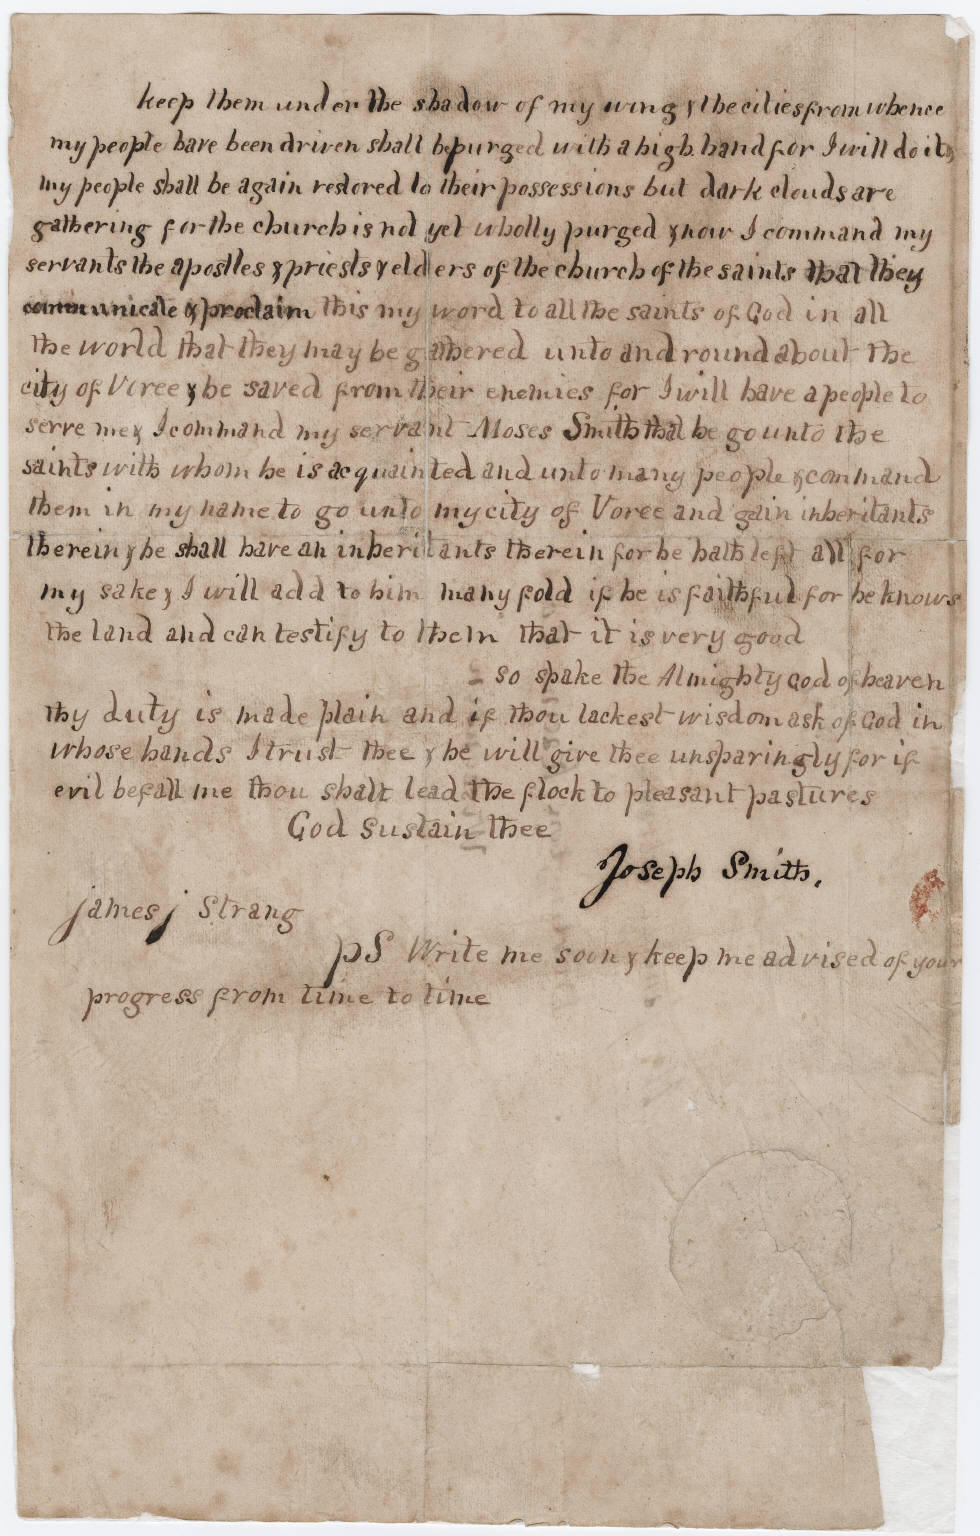 James Jesse Strang's letter of appointment from the Beinecke Rare Book and Manuscript Library, Yale University